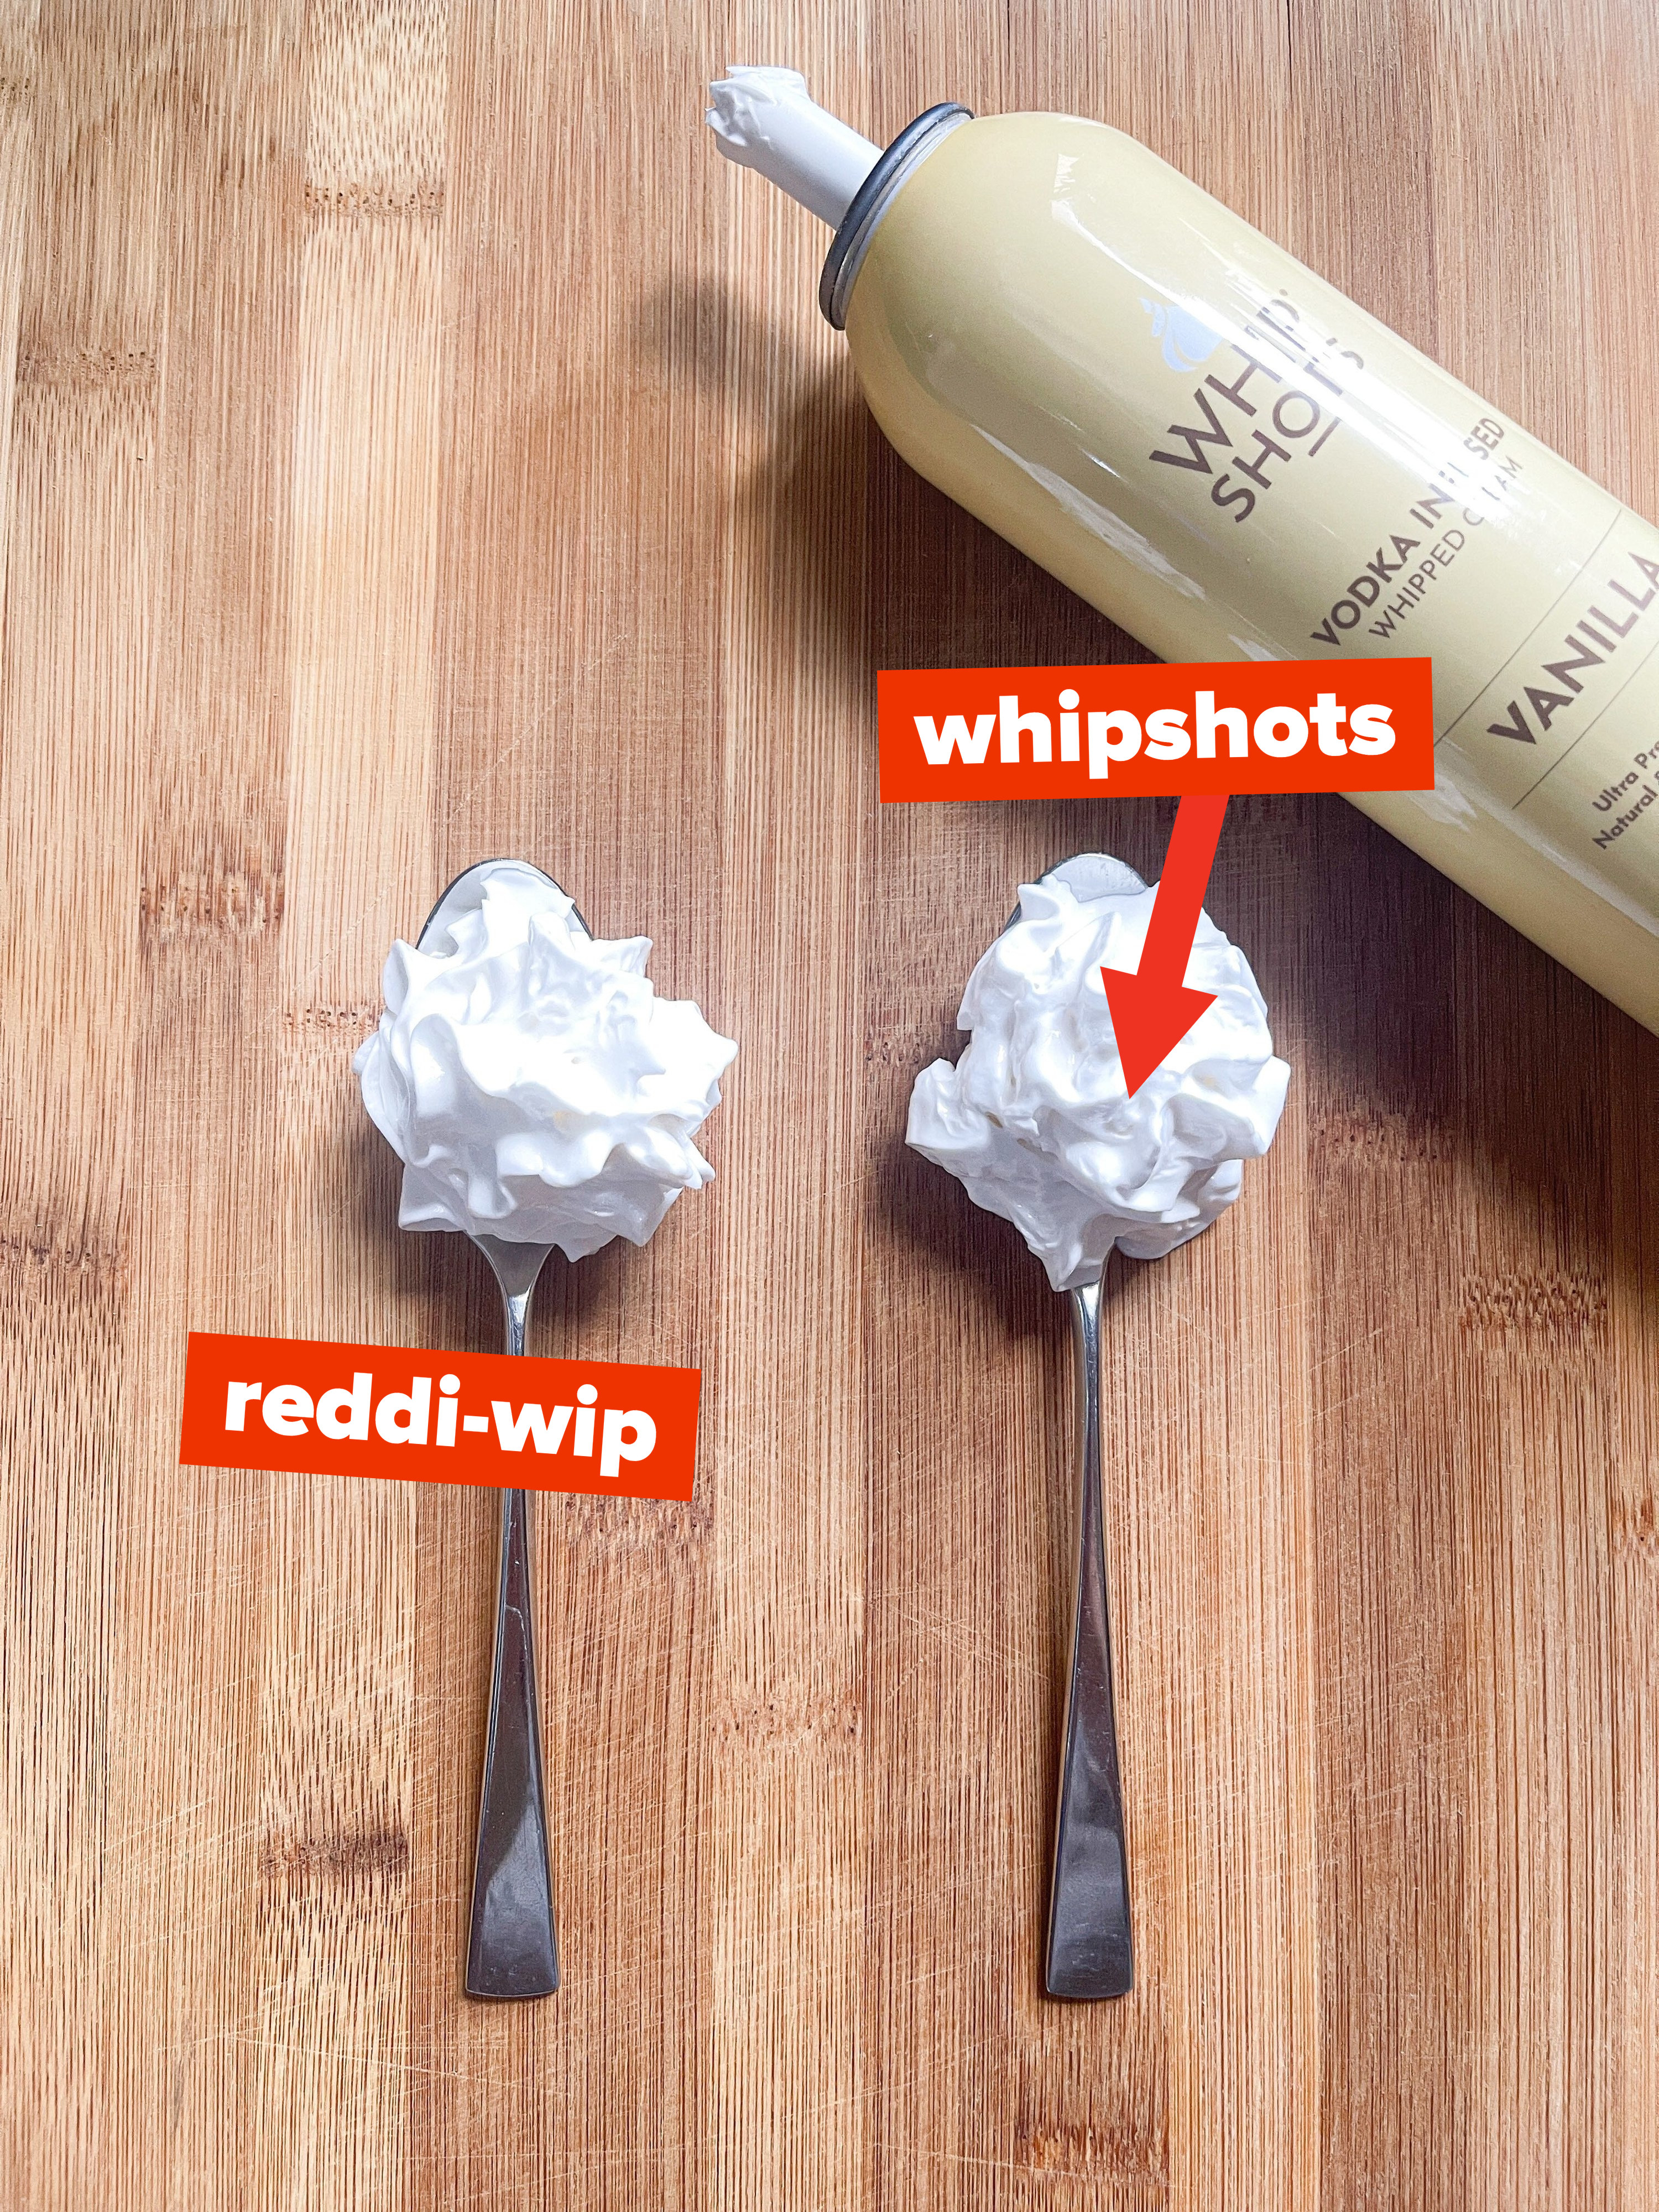 Whipshots Review: Trying Cardi B's New Spiked Whipped Cream